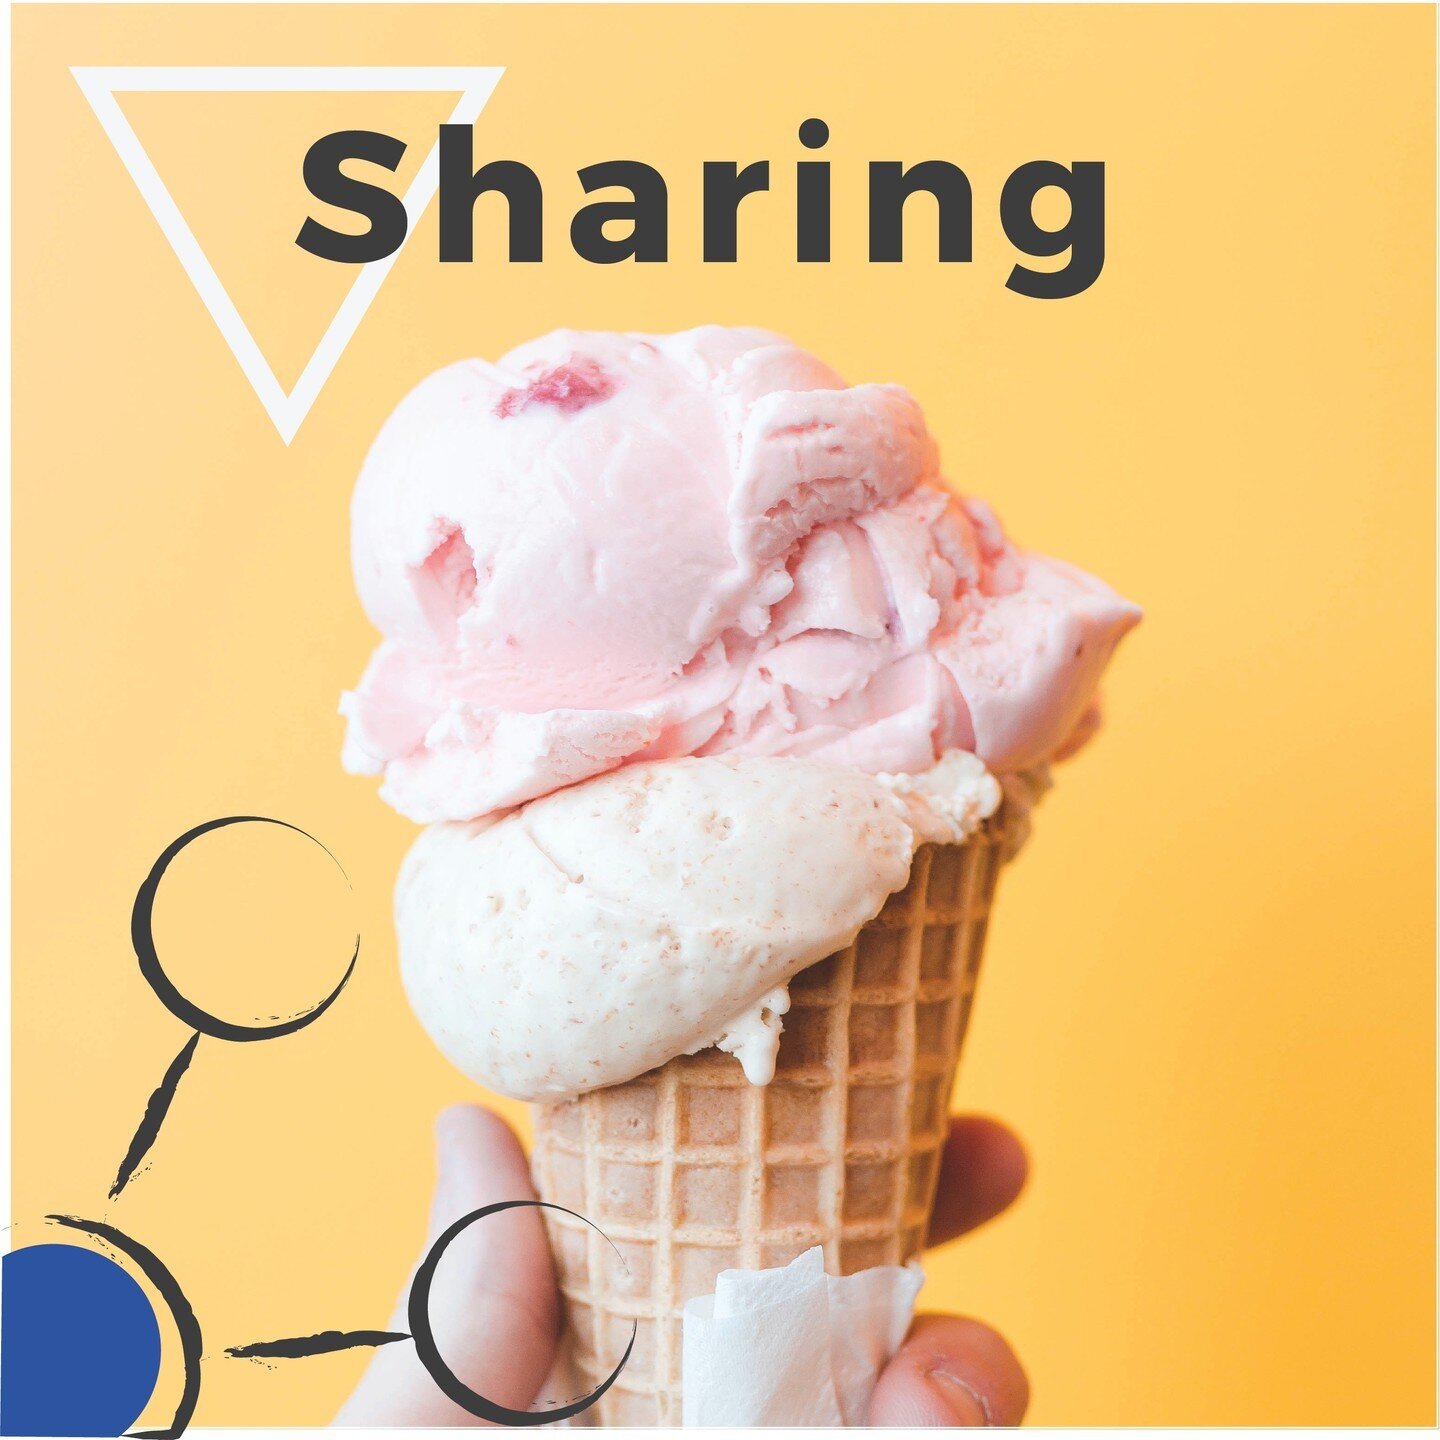 Sharing is our third building block of loyalty.

We're often asked if our loyalty metric replaces NPS? The answer is no. Sharing relates directly to a customer's desire to tell people about a good product or service. It's just one part of our compreh